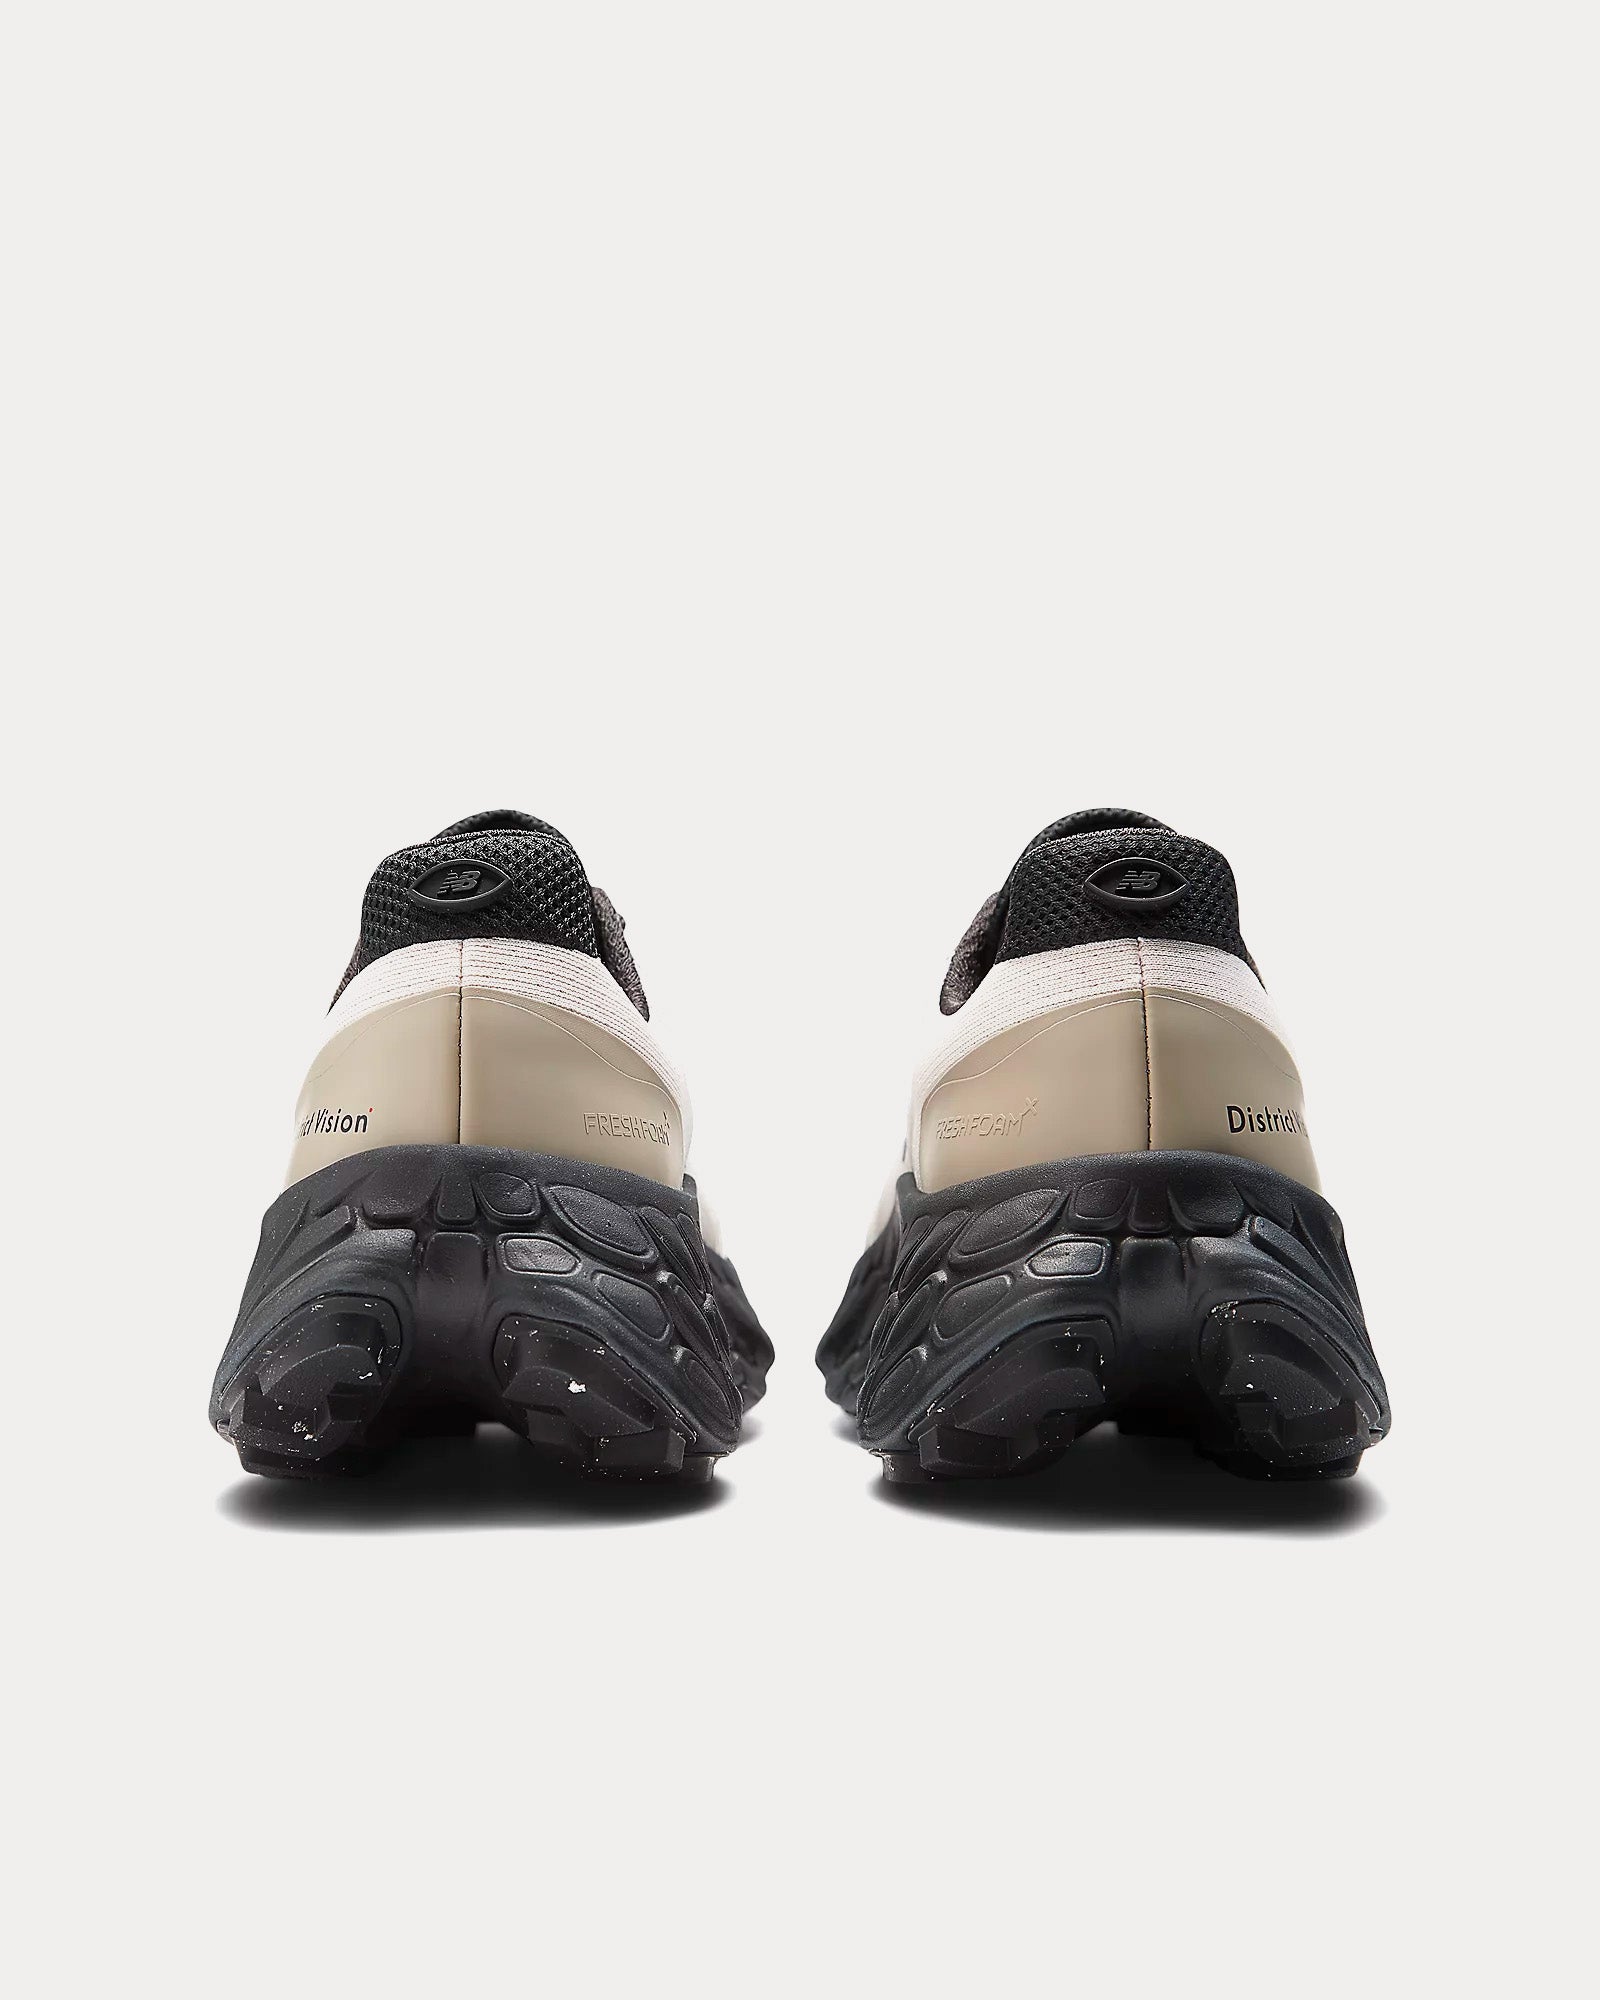 New Balance x District Vision - Fresh Foam More Trail Jet Stream / Taupe / Jet Black Running Shoes